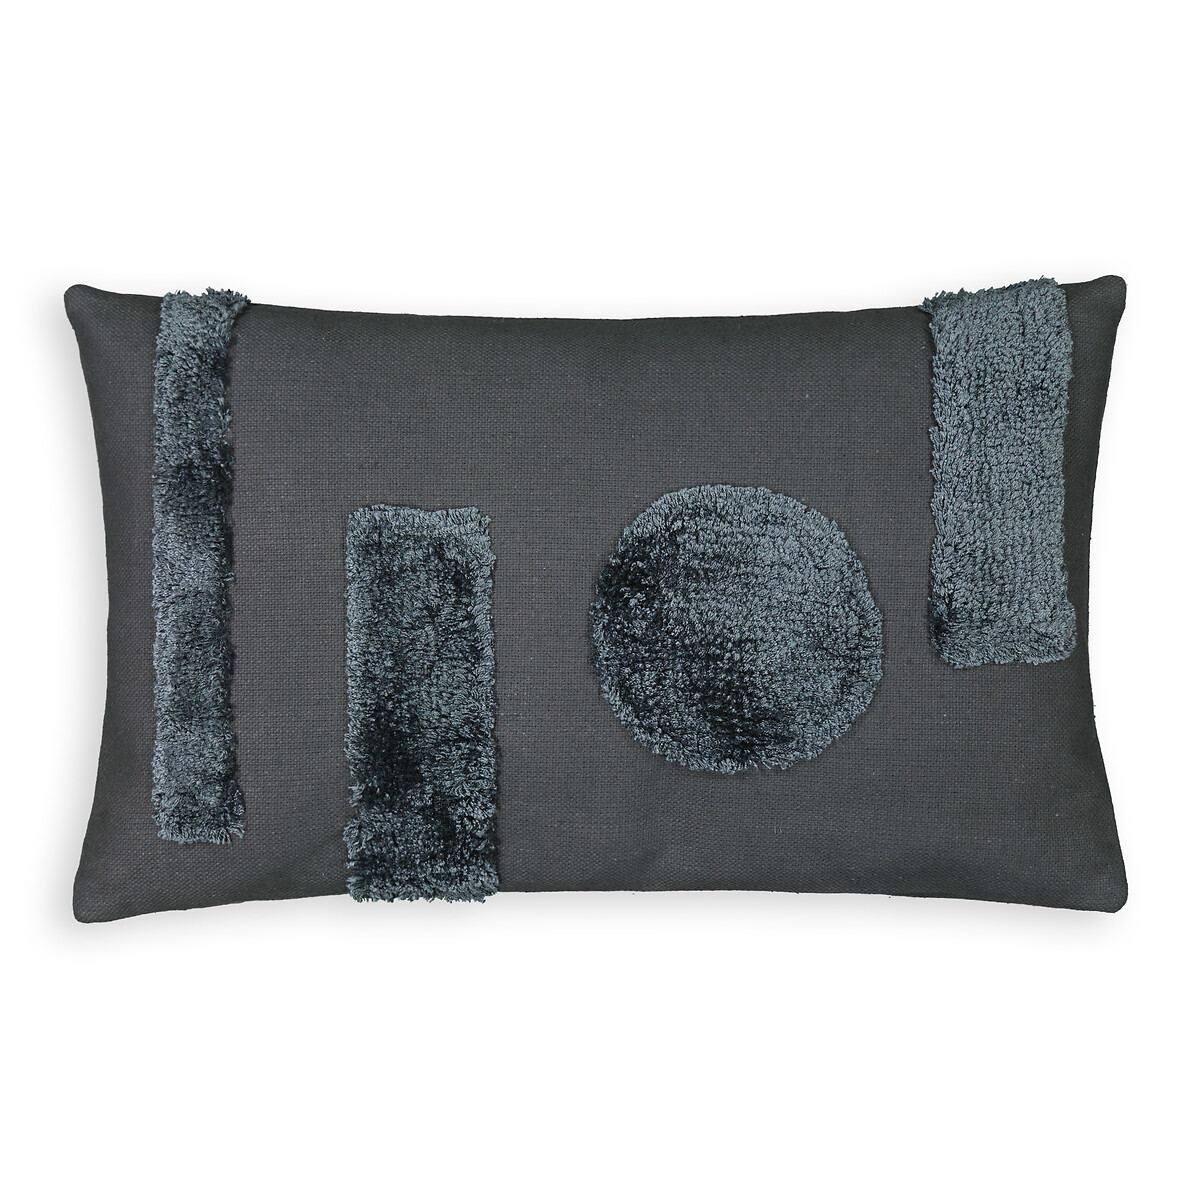 Lund Graphic Tufted Rectangular Cushion Cover